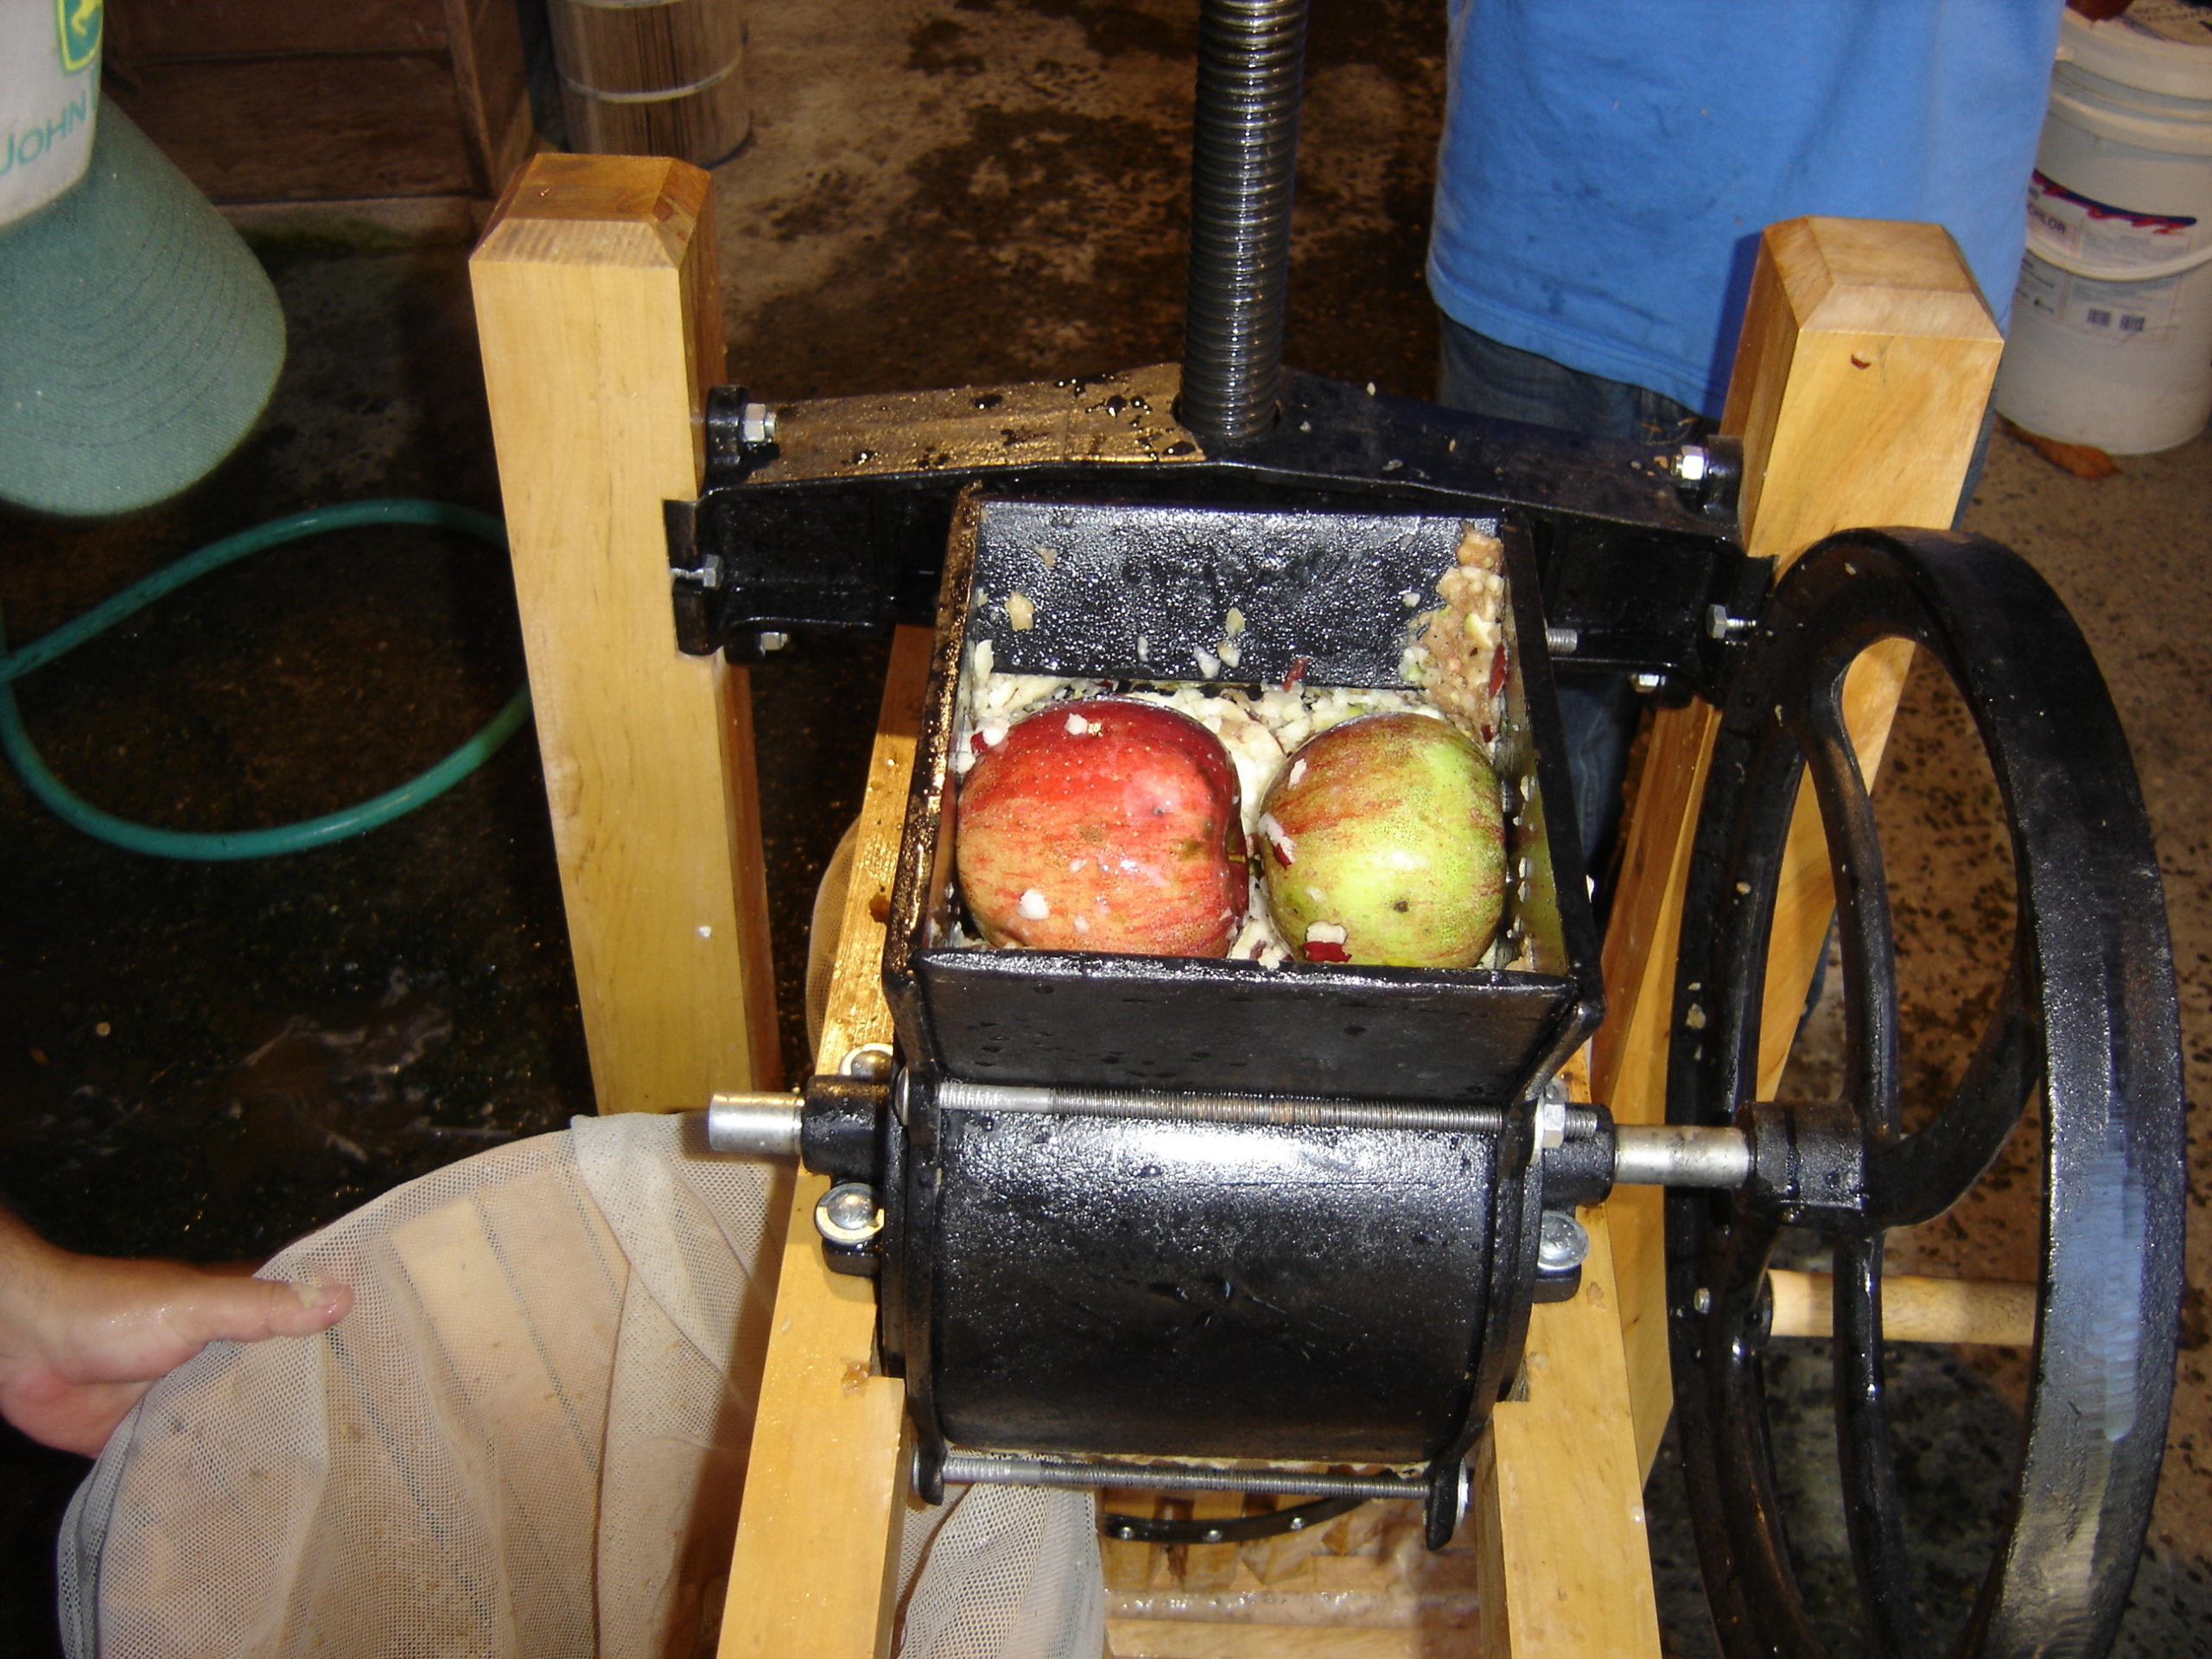 Several apples in the grinder. The wheel on the right is turned to grind the whole apples, allowing the pulp to drop into a wooden basket below.